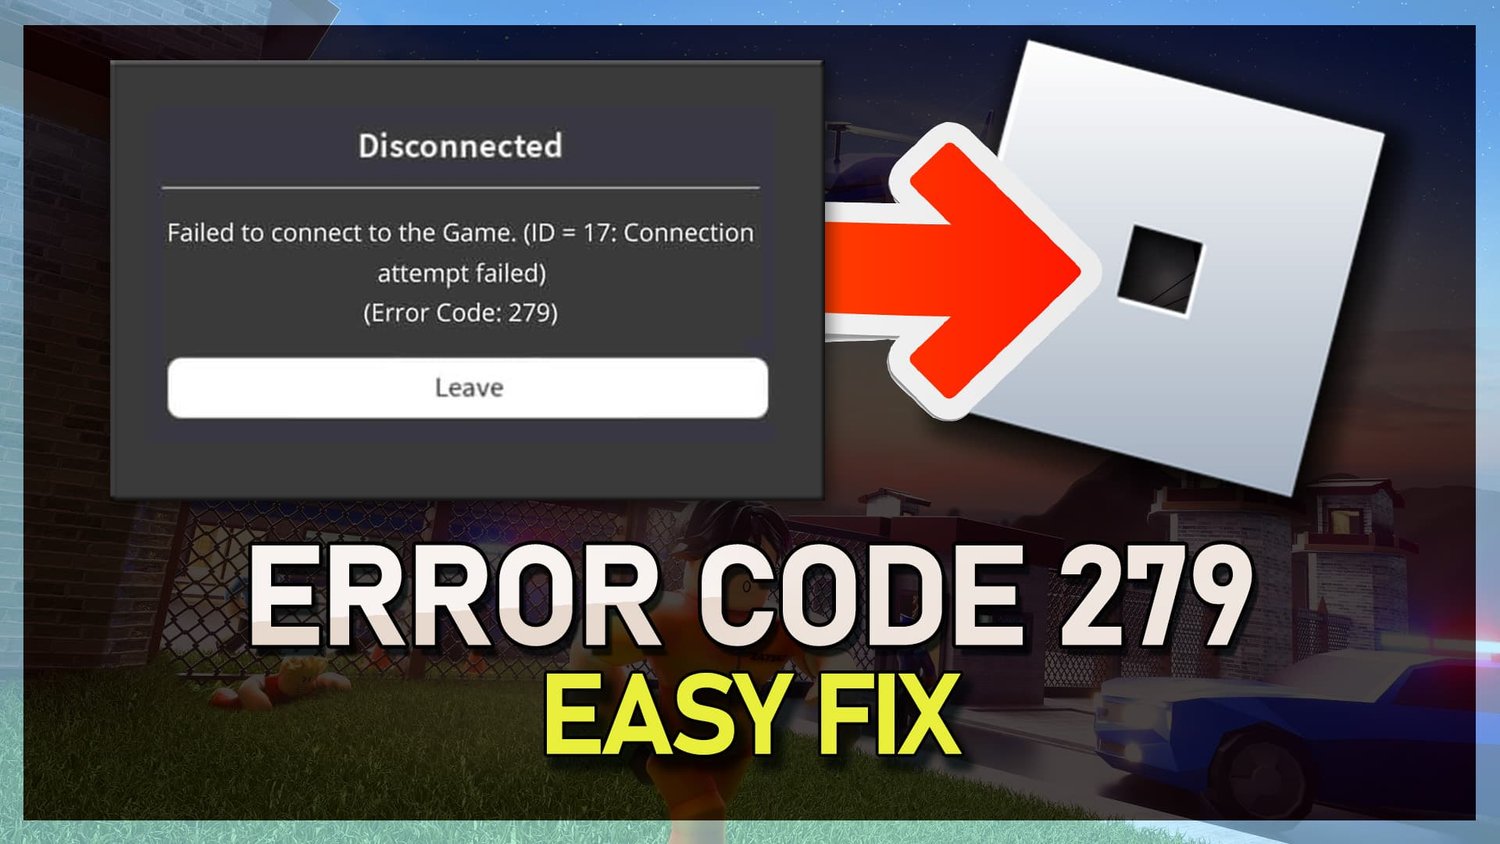 An error occurred while starting Roblox (FIX) 